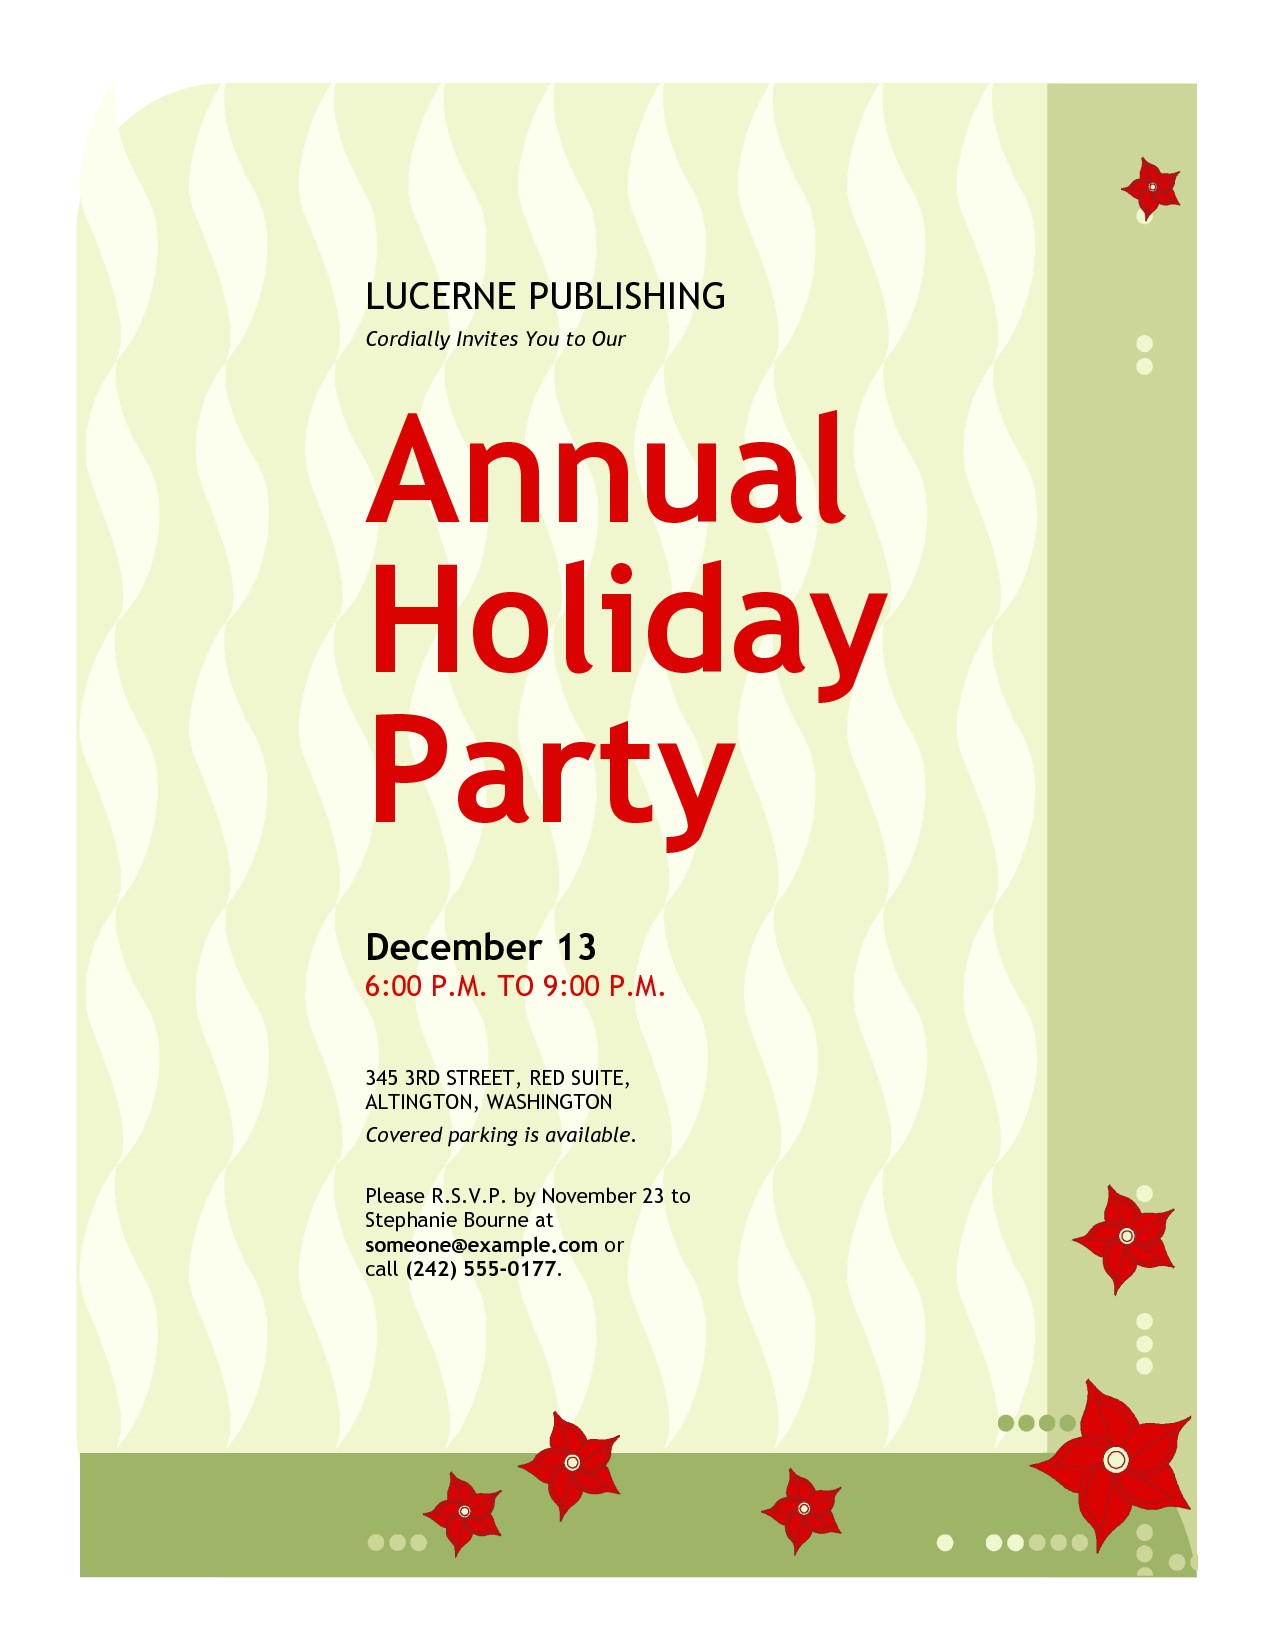 How to Word Christmas Party Invitation Office Christmas Party Invitation Wording Cimvitation